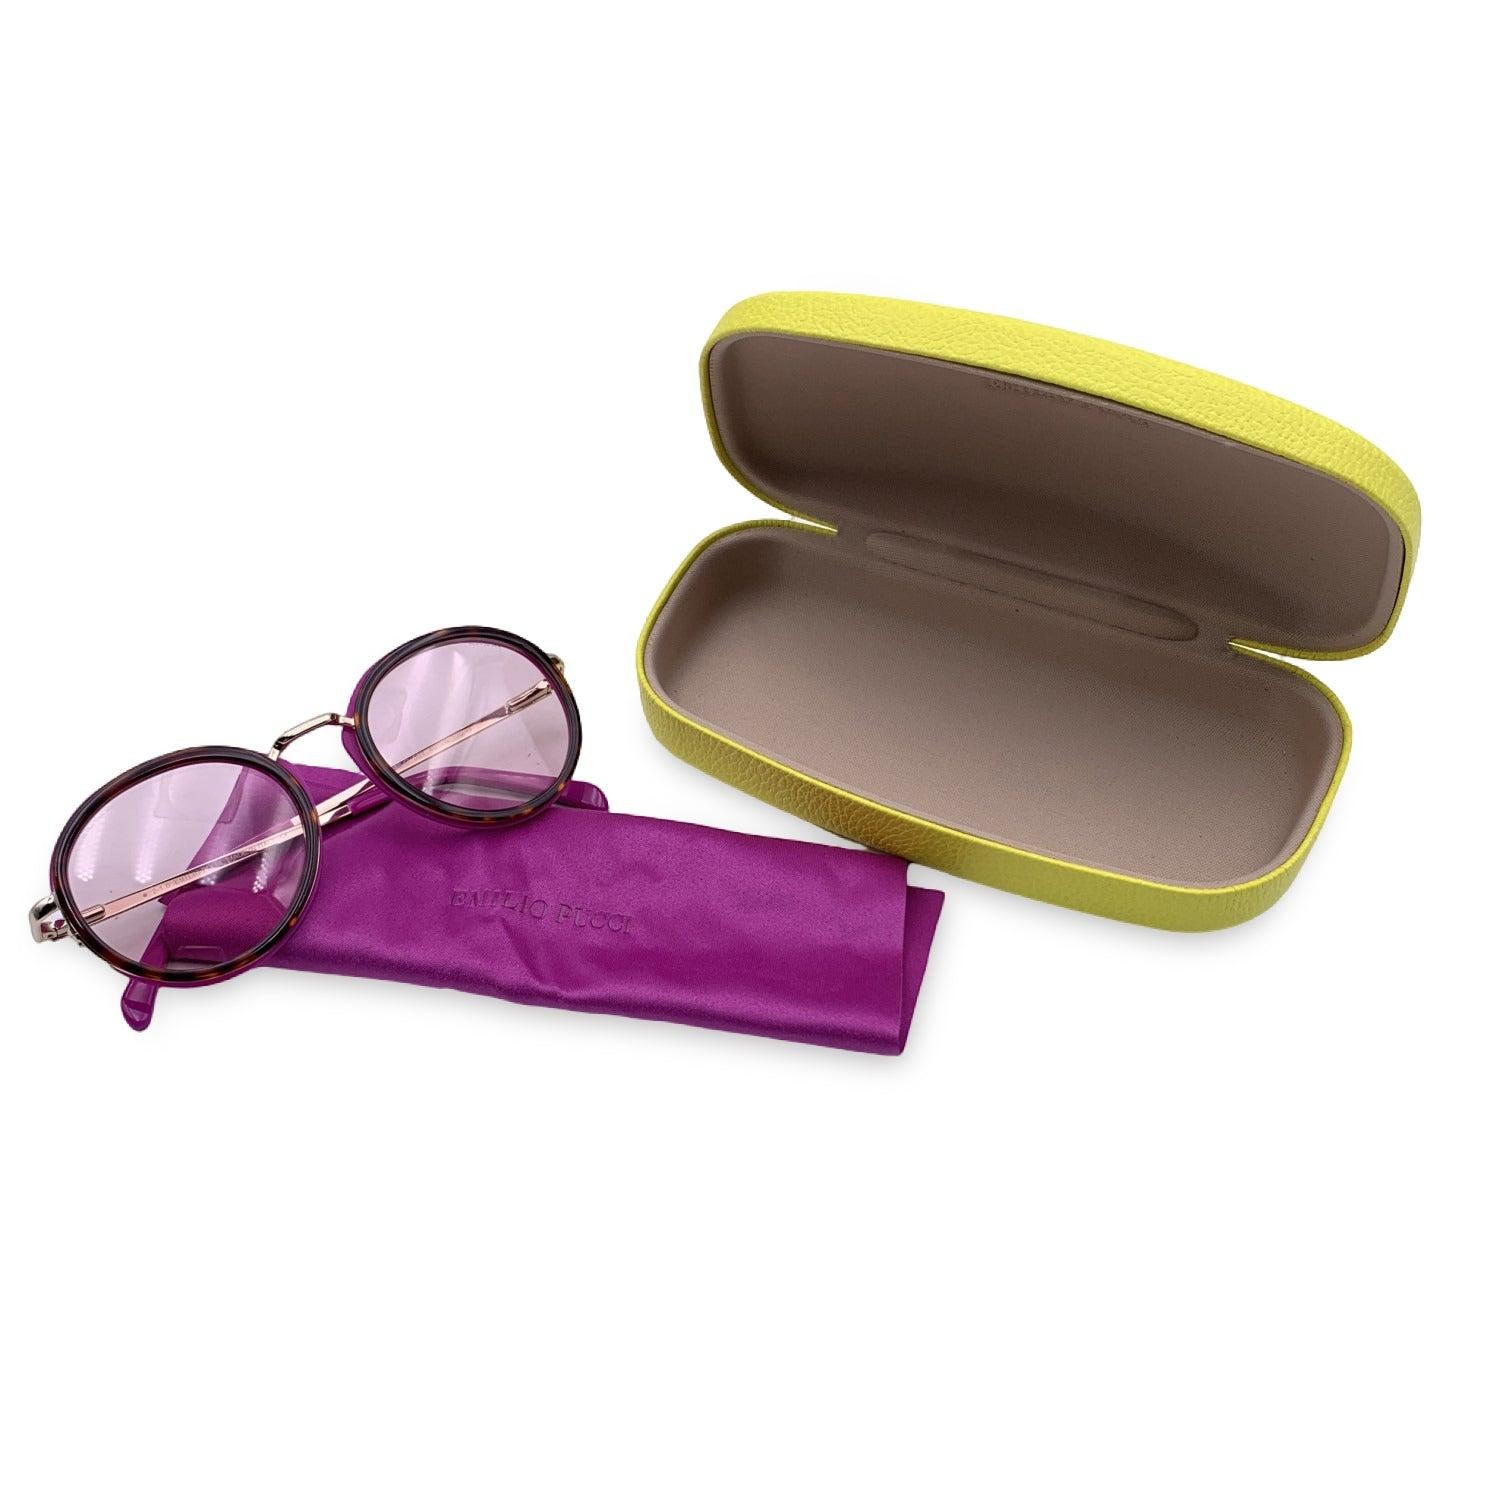 Emilio Pucci Sunglasses Model EP 46-O. Rounded design. Pink and tortoise frame with gold temples . Original light pink lenses. Mod & refs: EP 46-O 55Y 49/20 135 mm. Made in Italy Details MATERIAL: Acetate COLOR: Pink MODEL: EP 46-O GENDER: Women